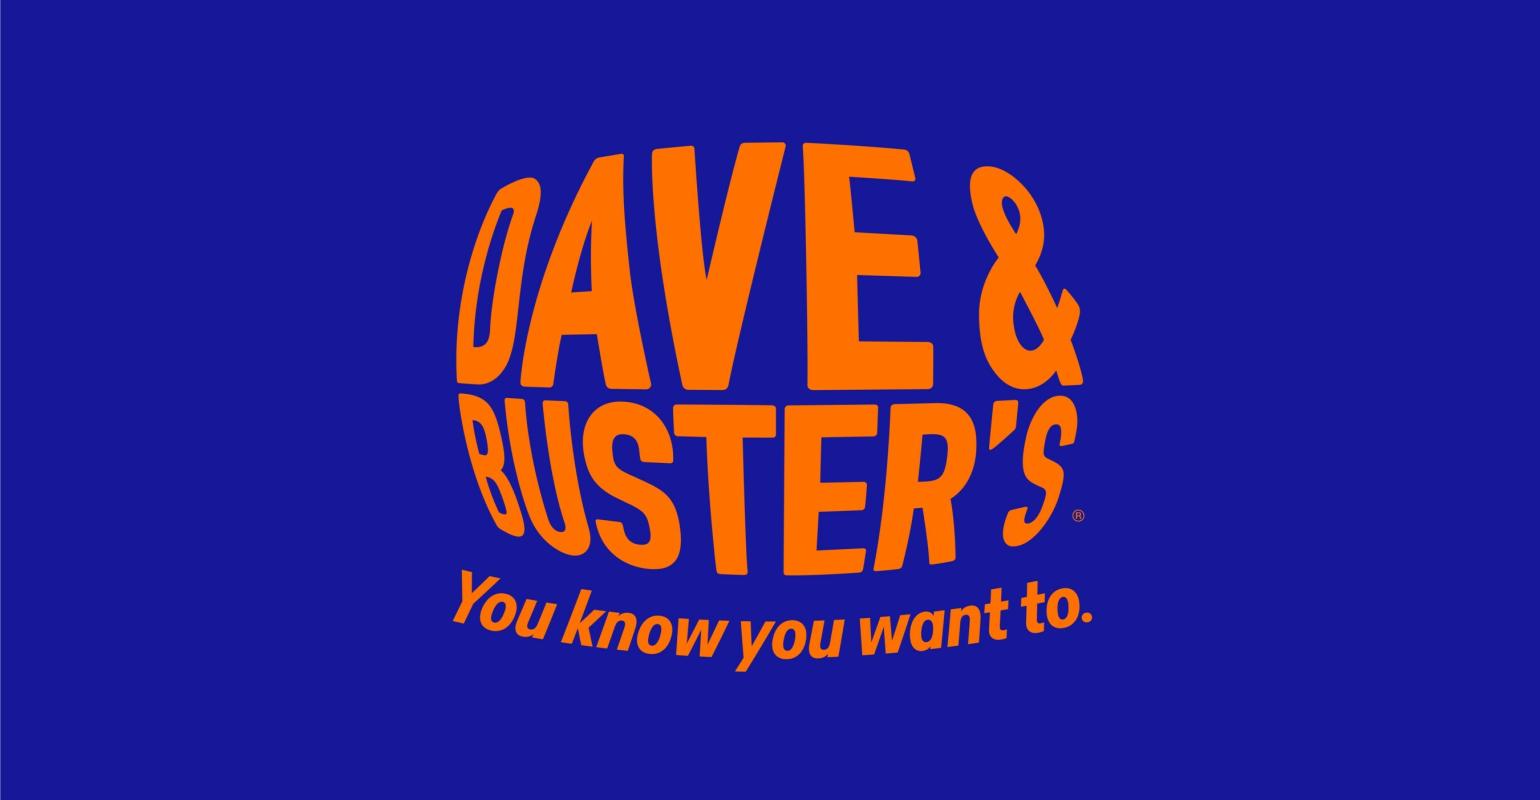 Dave & Buster's might convert some units to Main Event